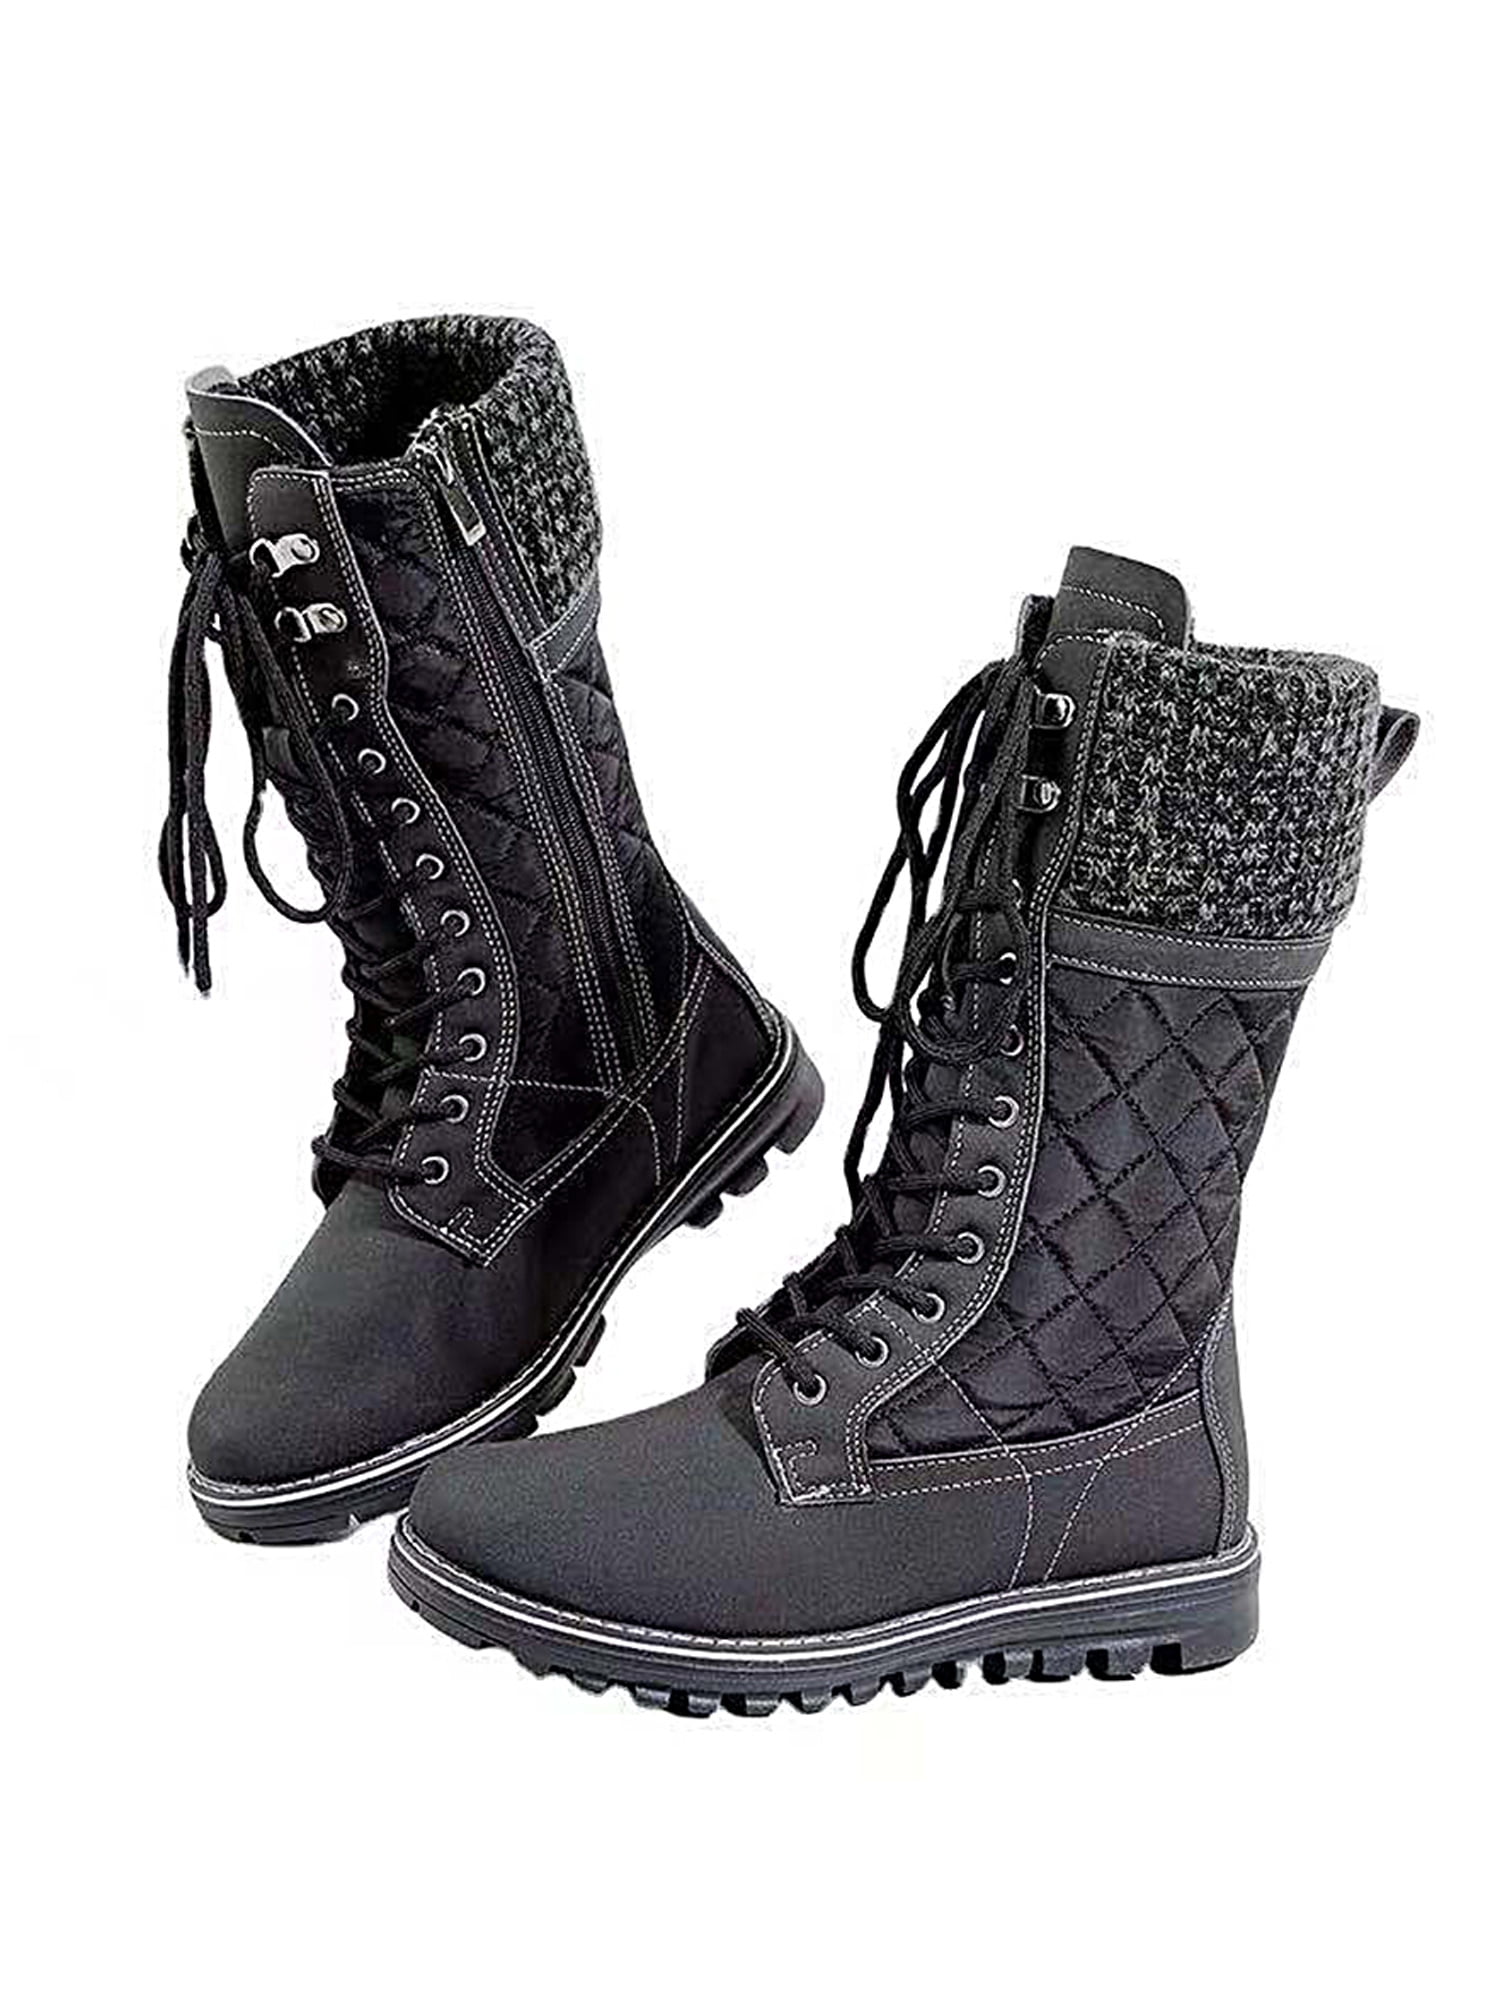 Mens Side Zip PU Leather Military Knight Mid-calf Boots Combat Motorcycle Shoes 